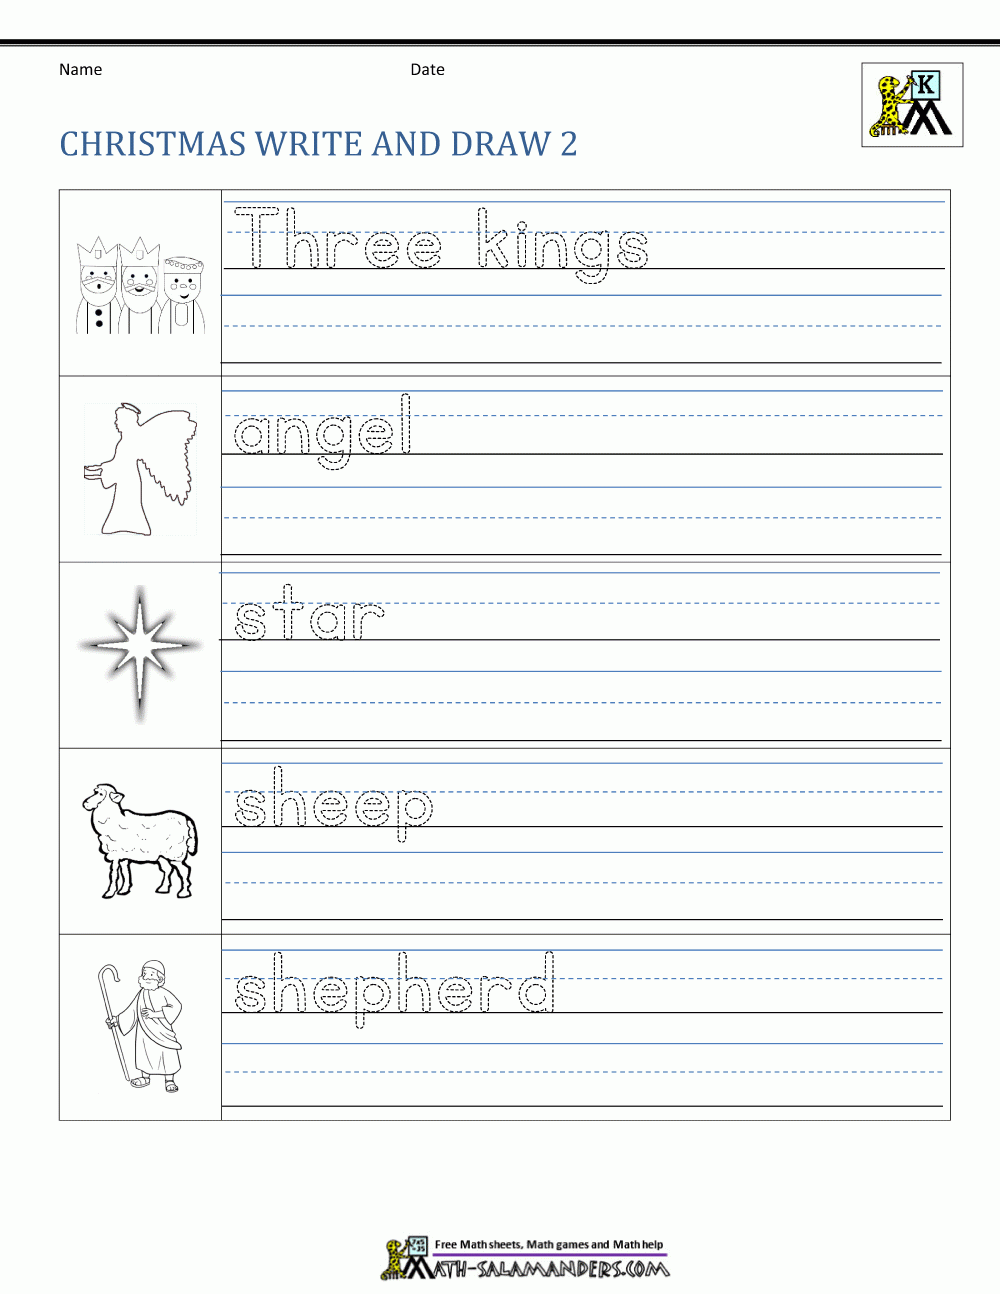 Free Christmas Worksheets For Kids